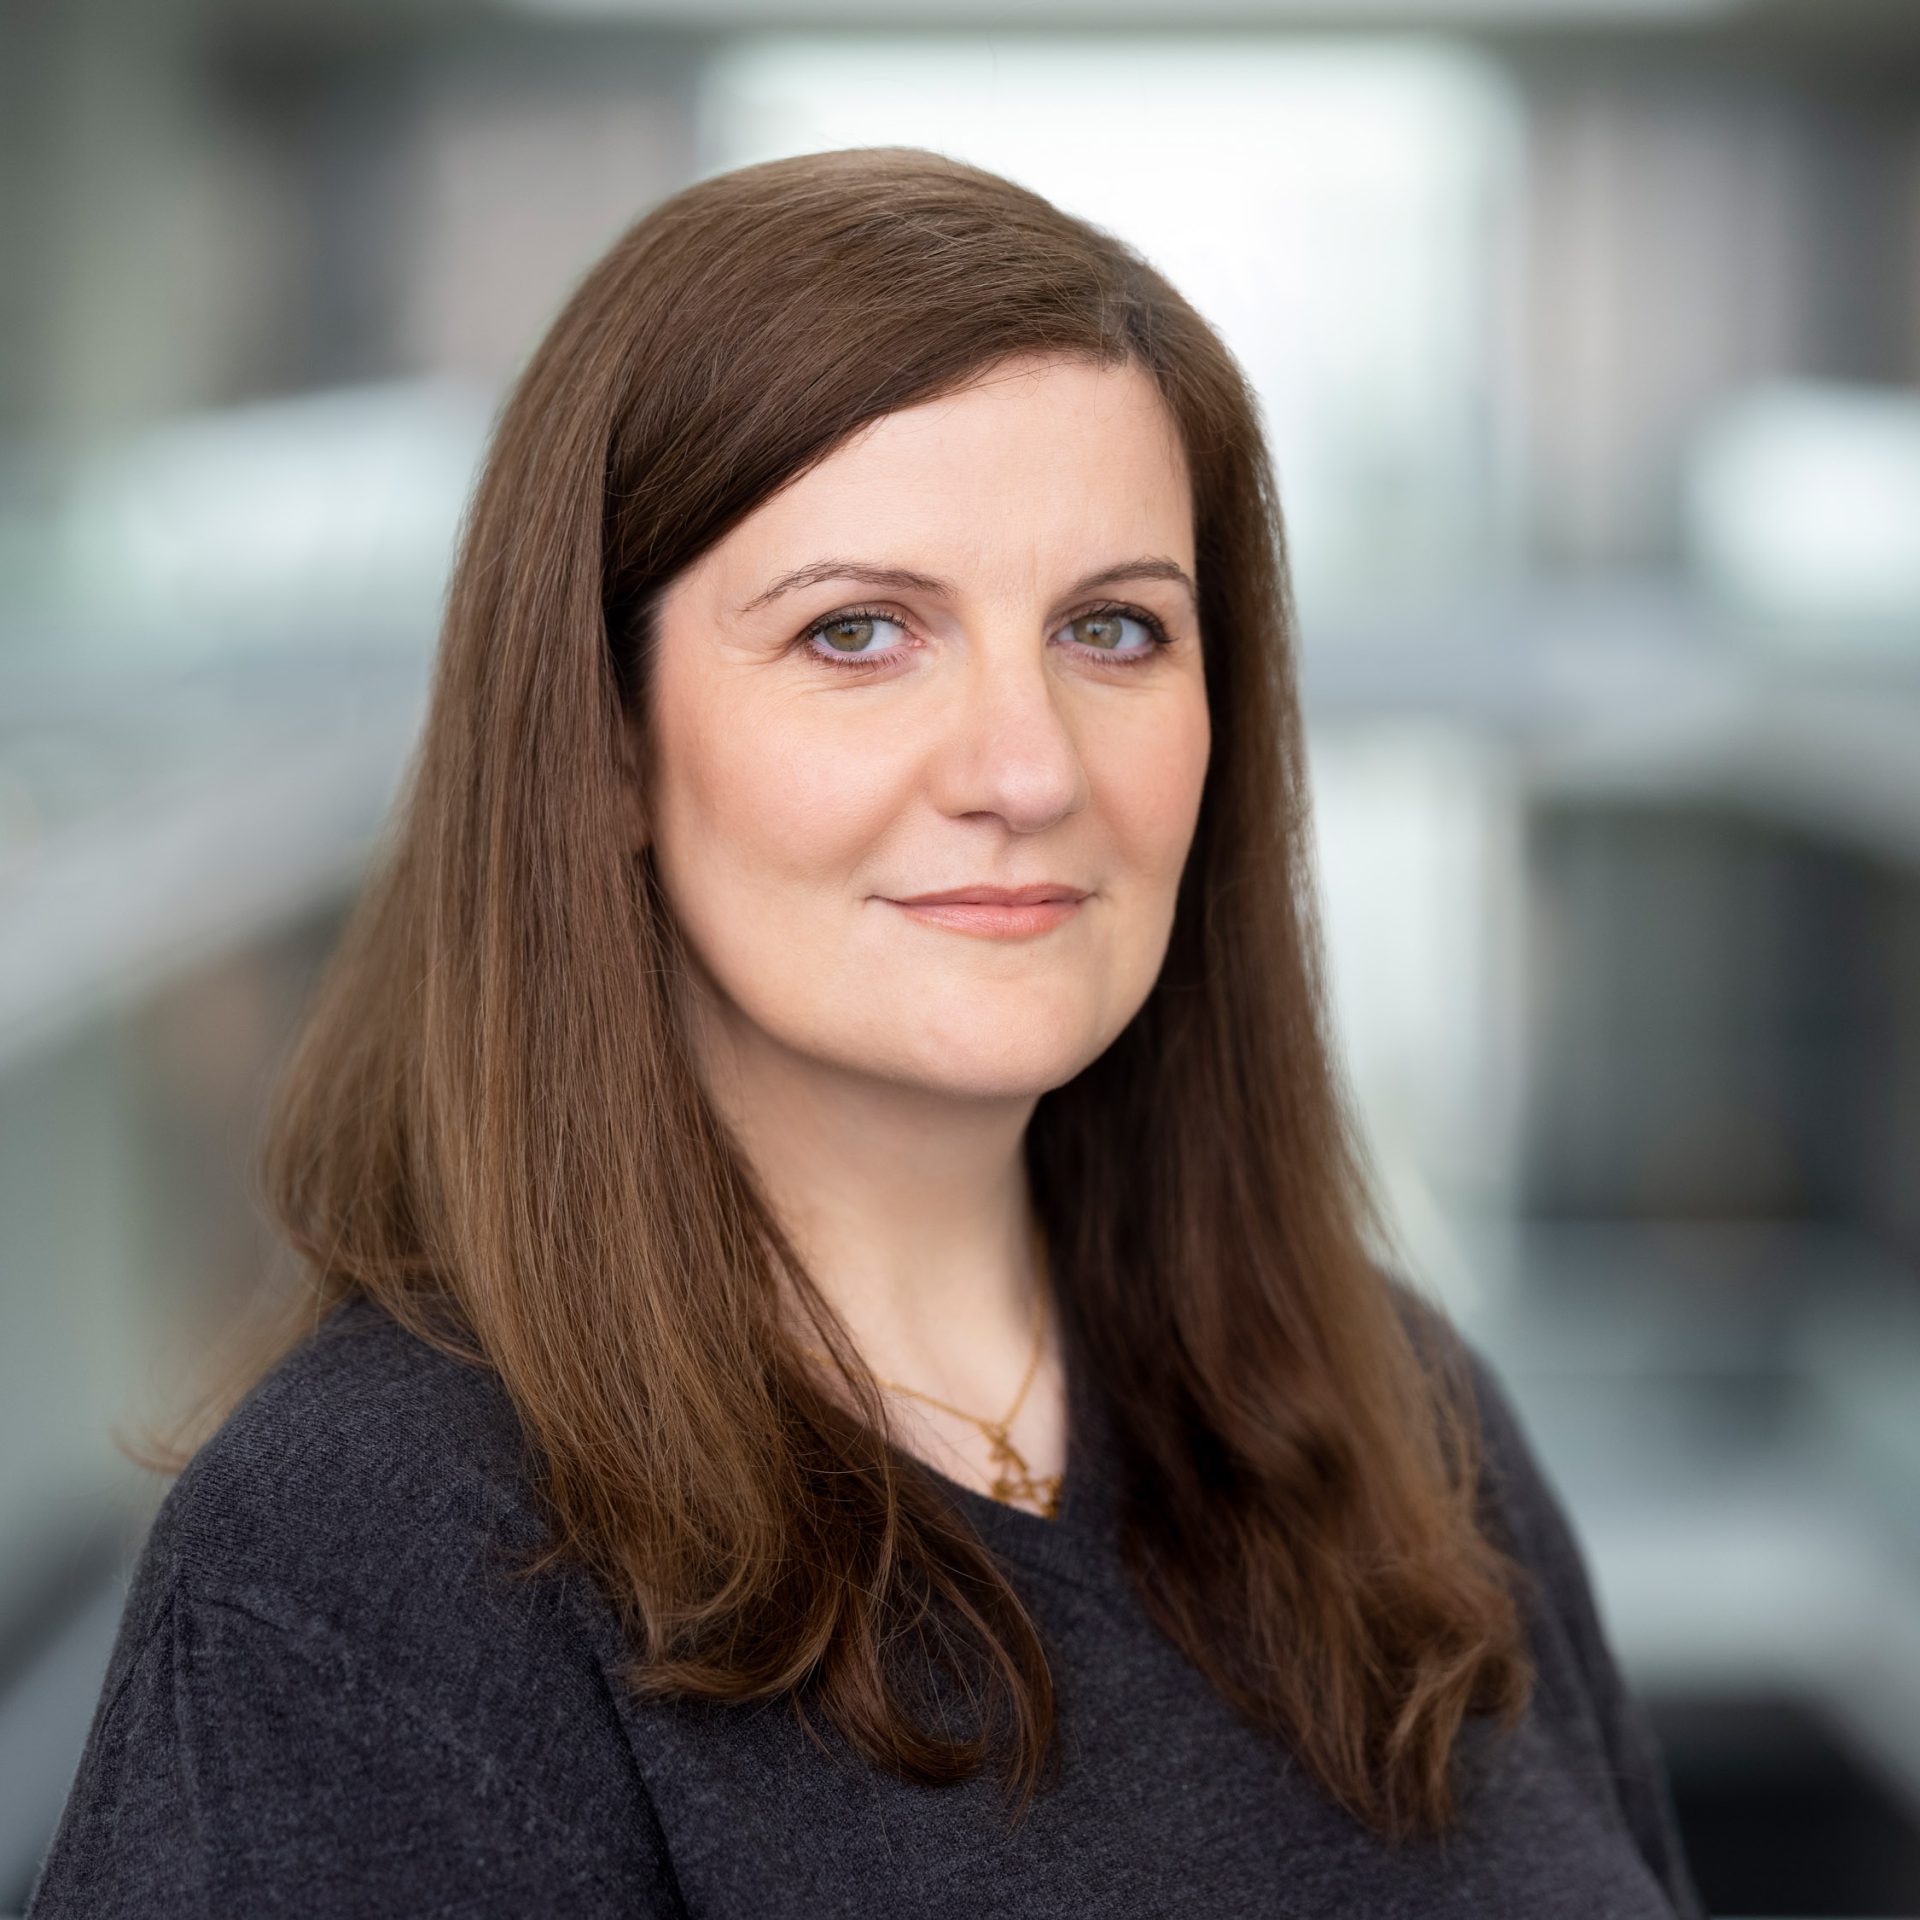 ITN head shots, 28th February to 2nd March 2023. Commisioned by Frances Mullan